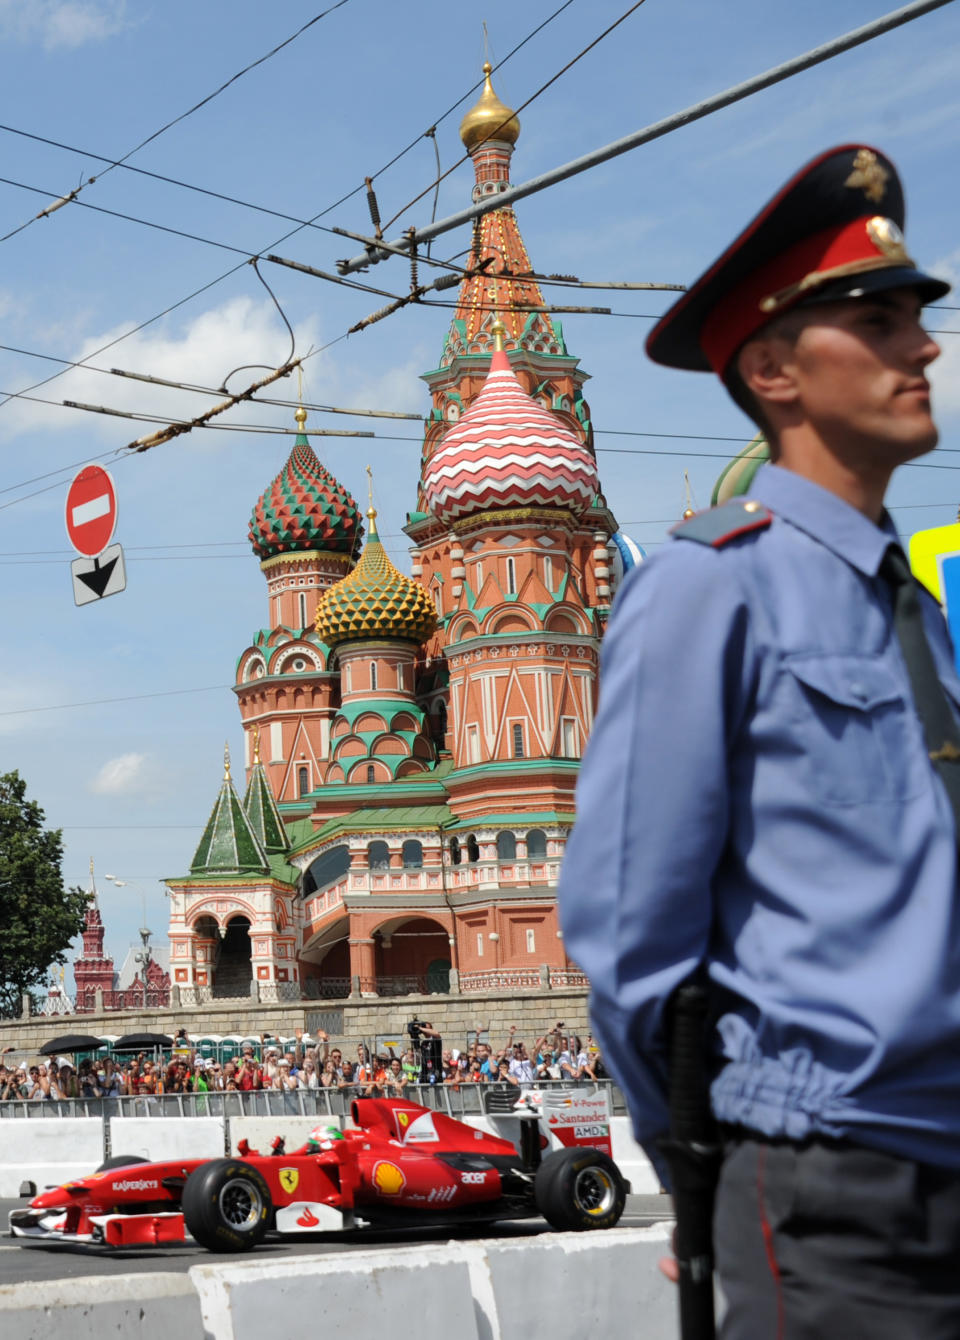 Formula One Scuderia Ferrari team driver Giancarlo Fisichella speeds past St. Basil's Cathedral during the "Moscow City Racing" show on July 15, 2012 in central Moscow. AFP PHOTO / KIRILL KUDRYAVTSEVKIRILL KUDRYAVTSEV/AFP/GettyImages